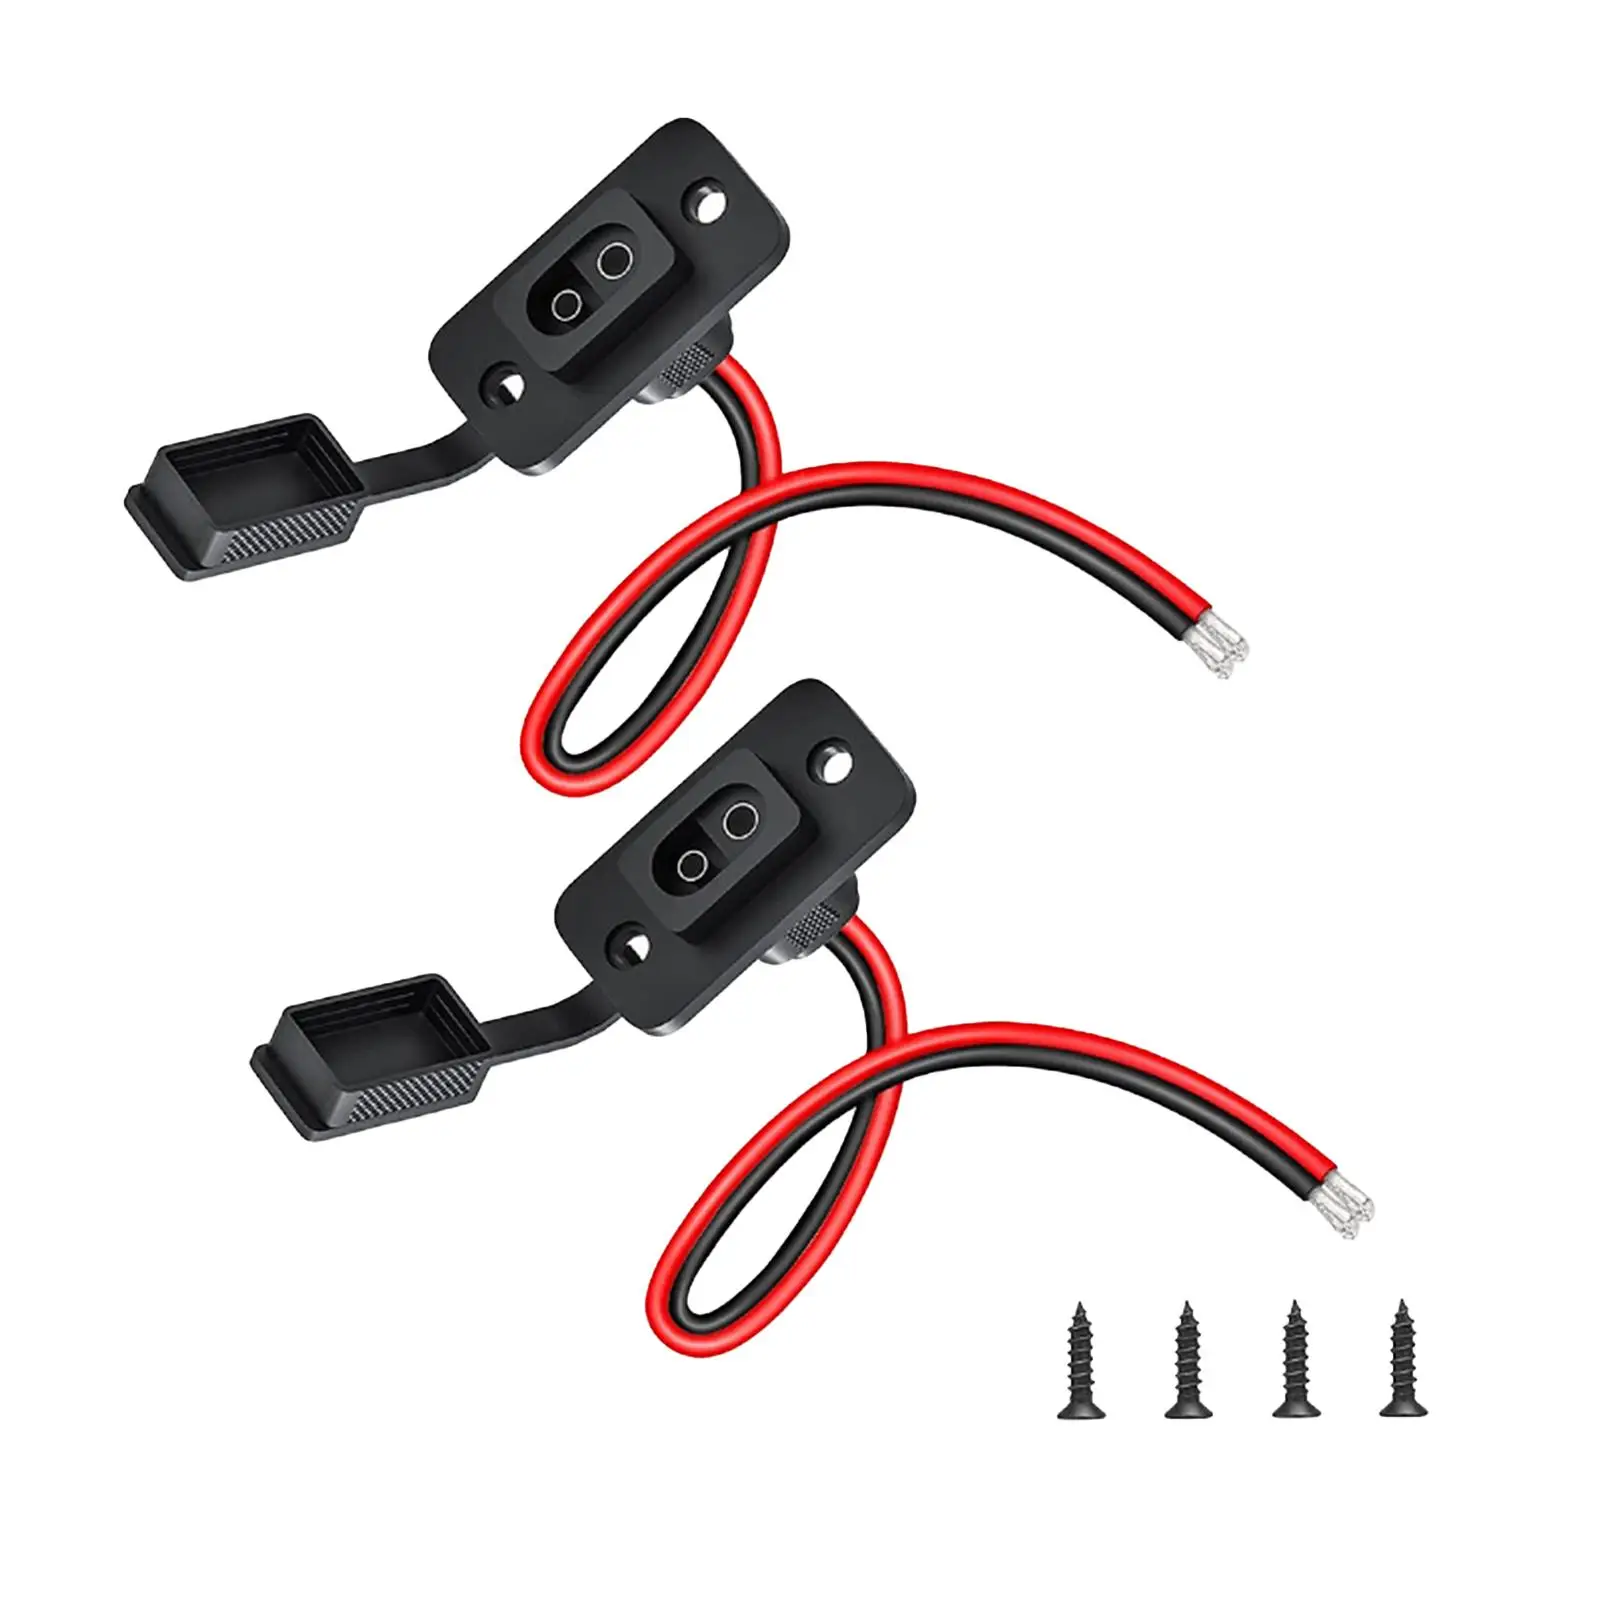 2 Pieces SAE Socket Cars Quick Connect Disconnect Accessory Extension Cord